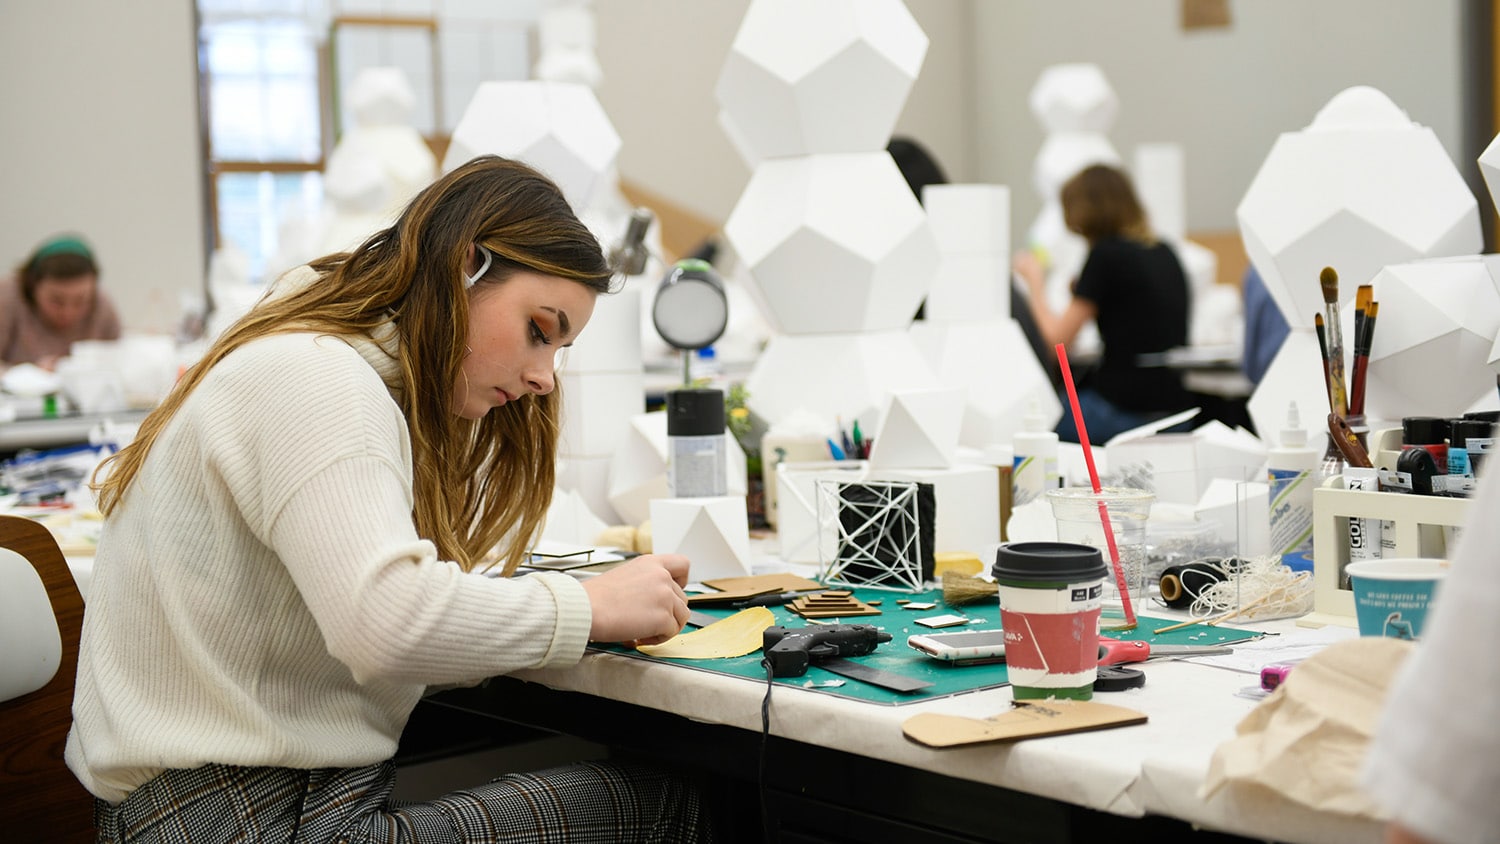 A woman works in the design lab.